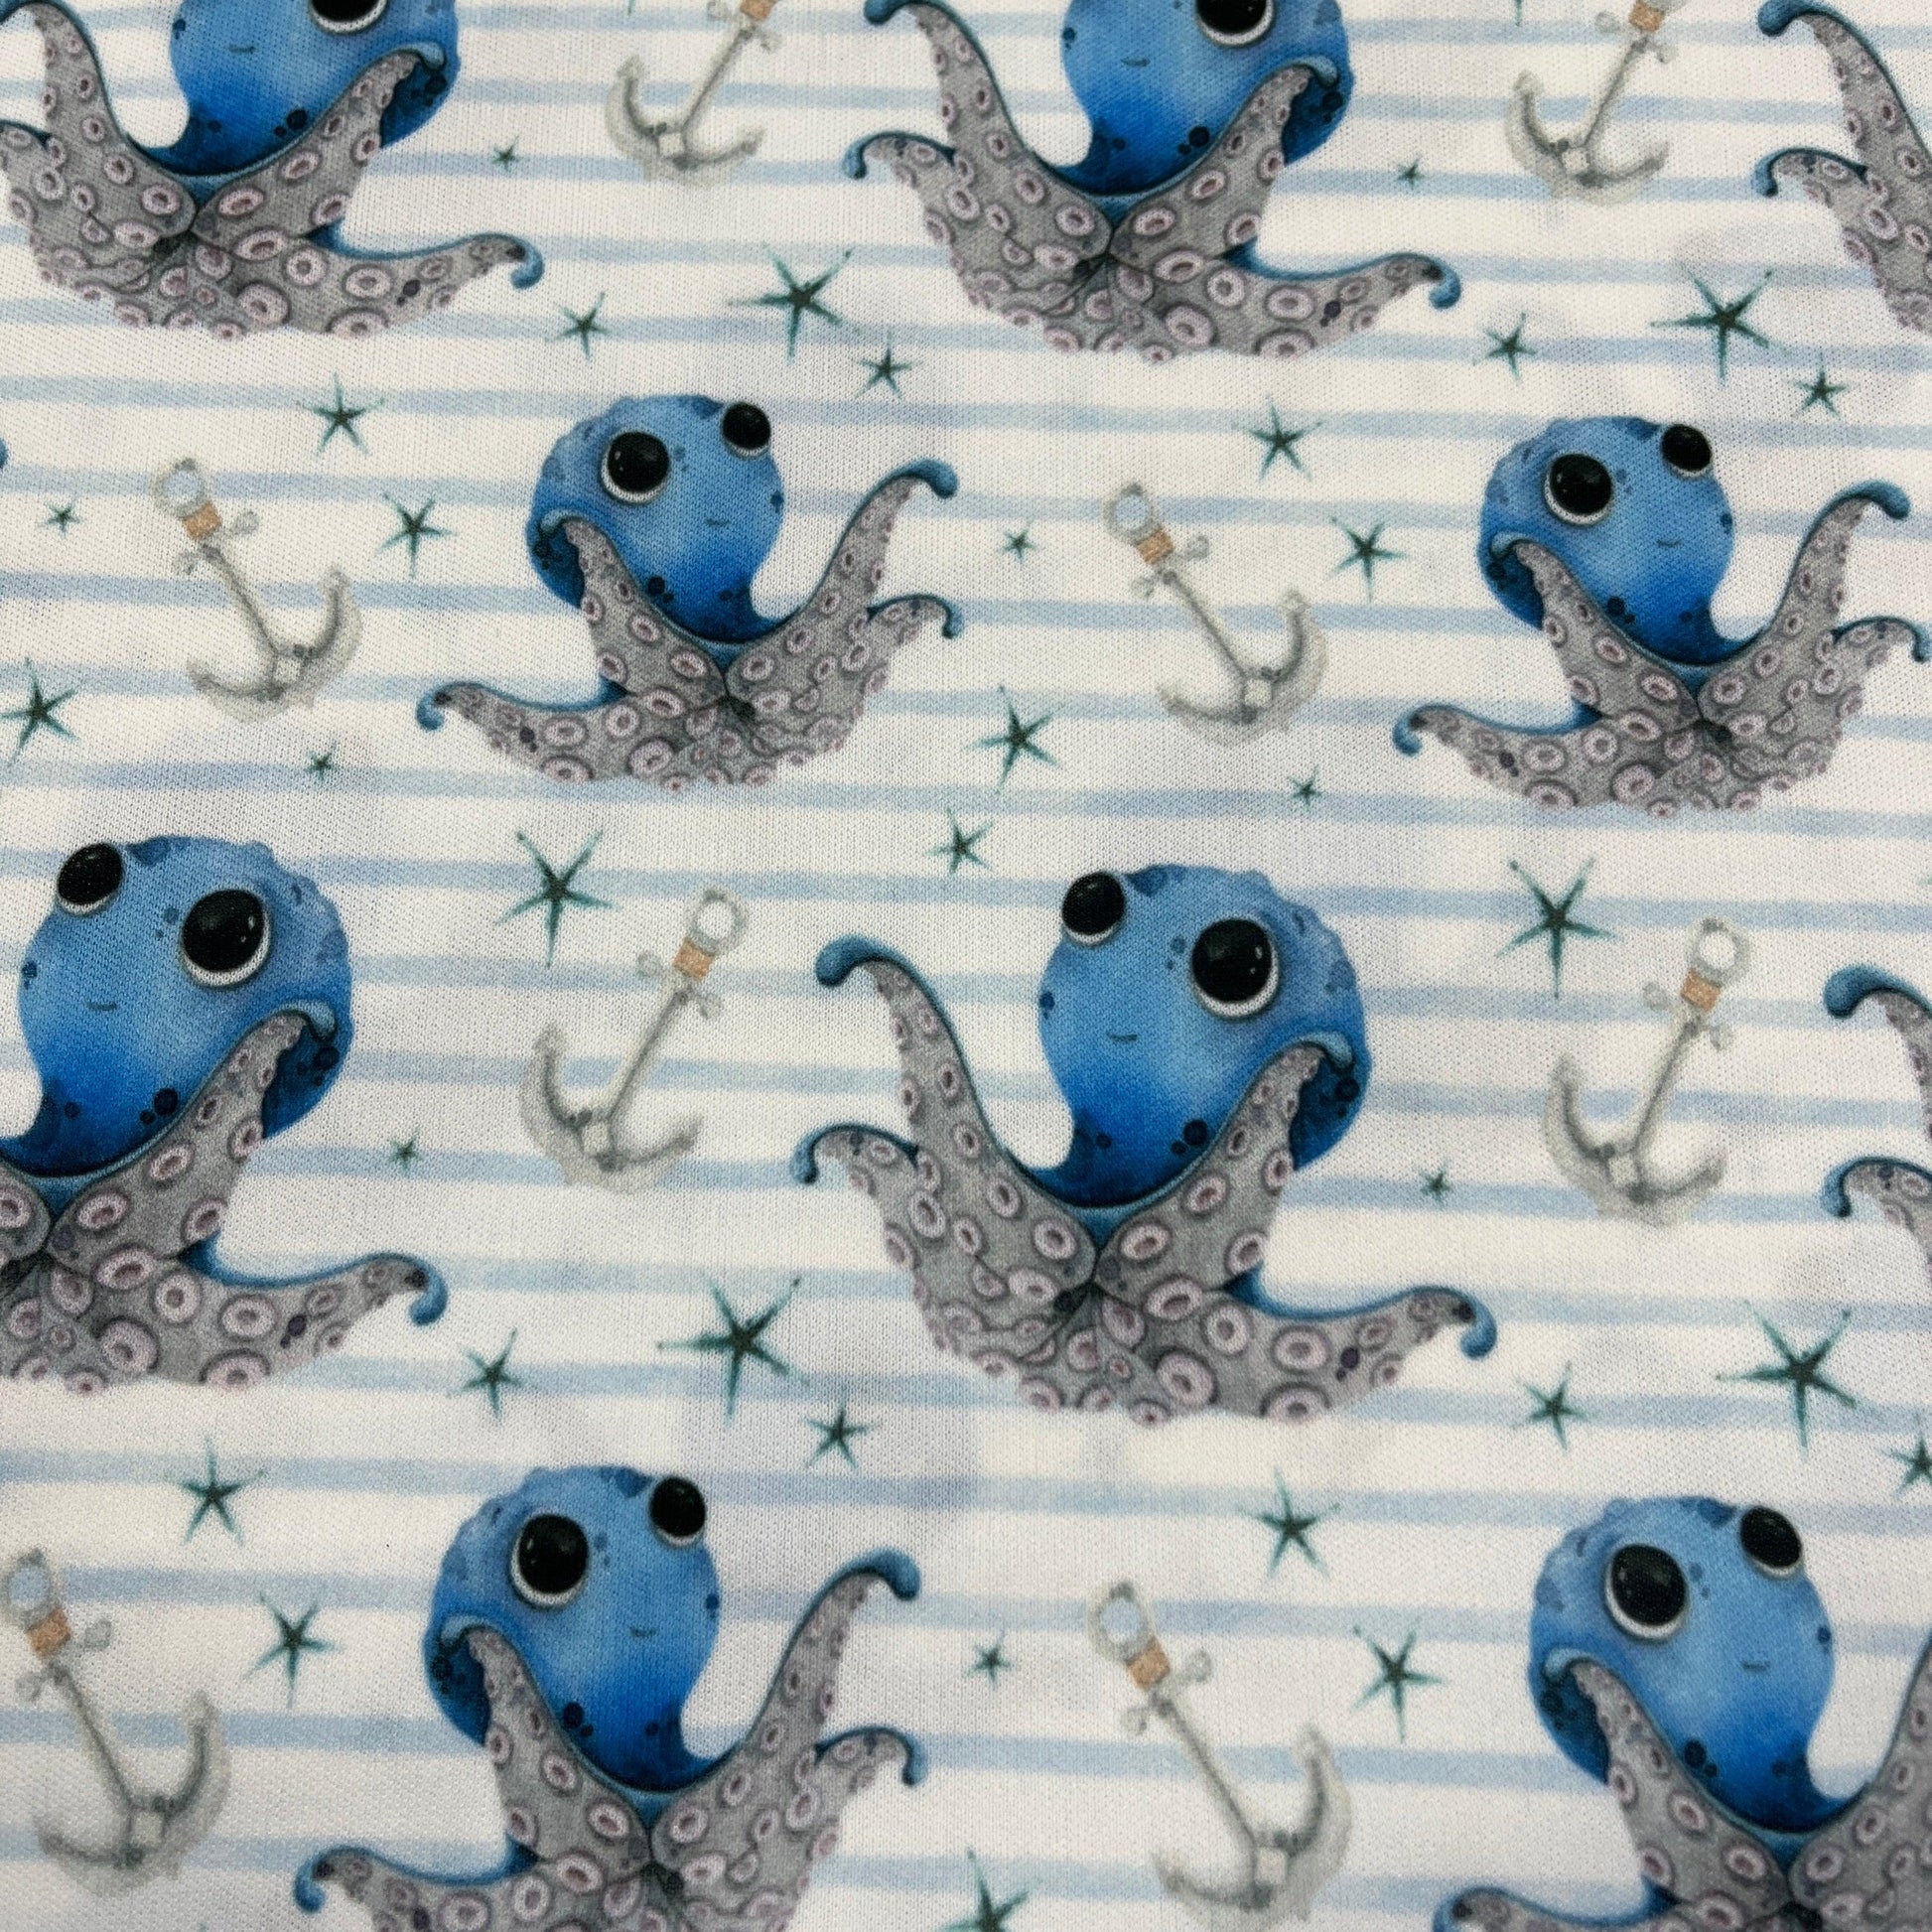 Baby Octopus 1 mil PUL Fabric - Made in the USA - Nature's Fabrics